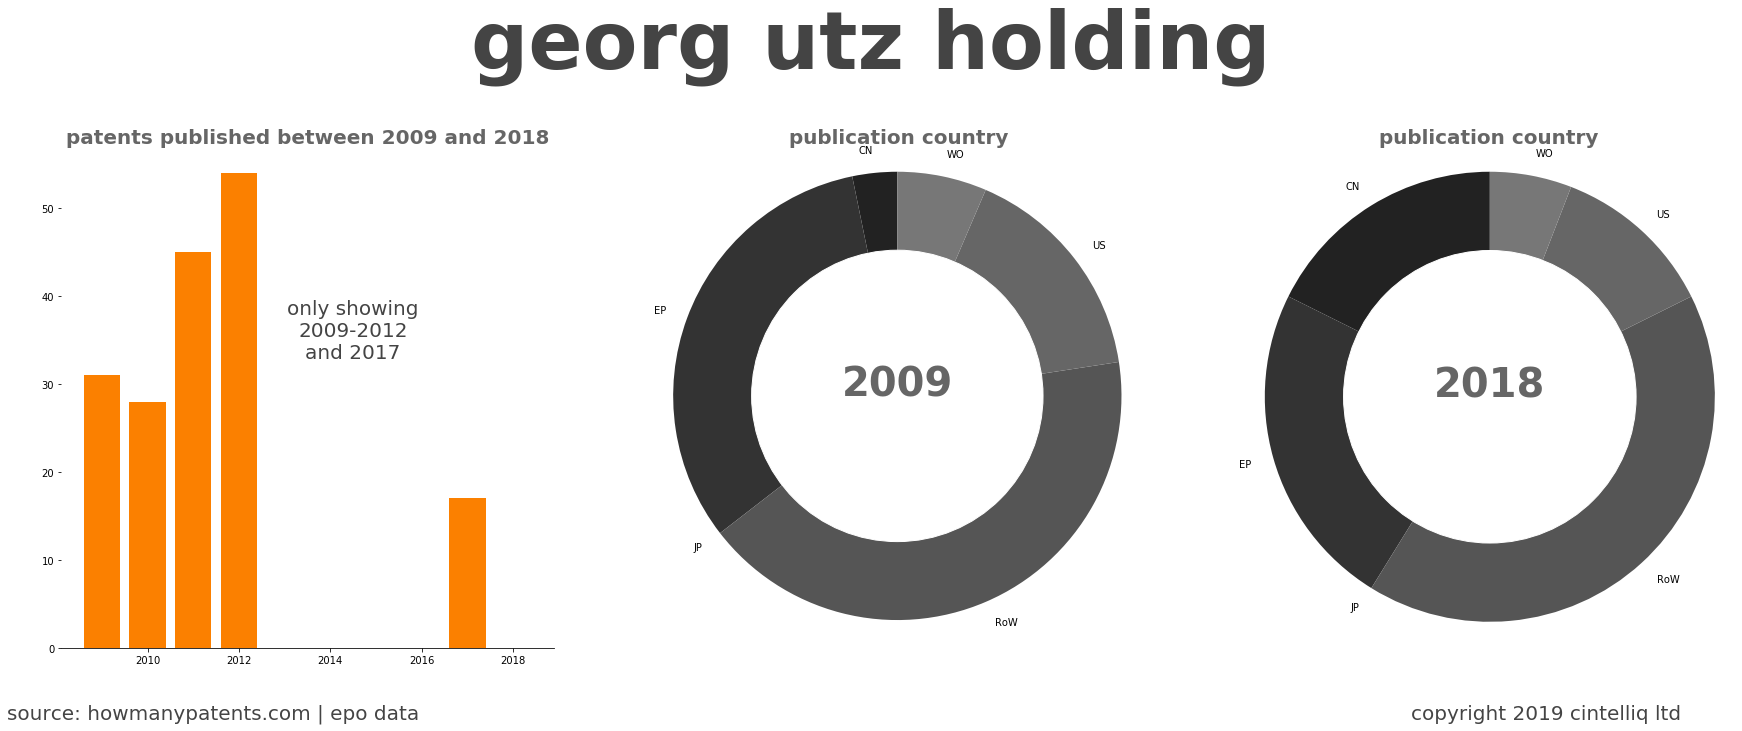 summary of patents for Georg Utz Holding